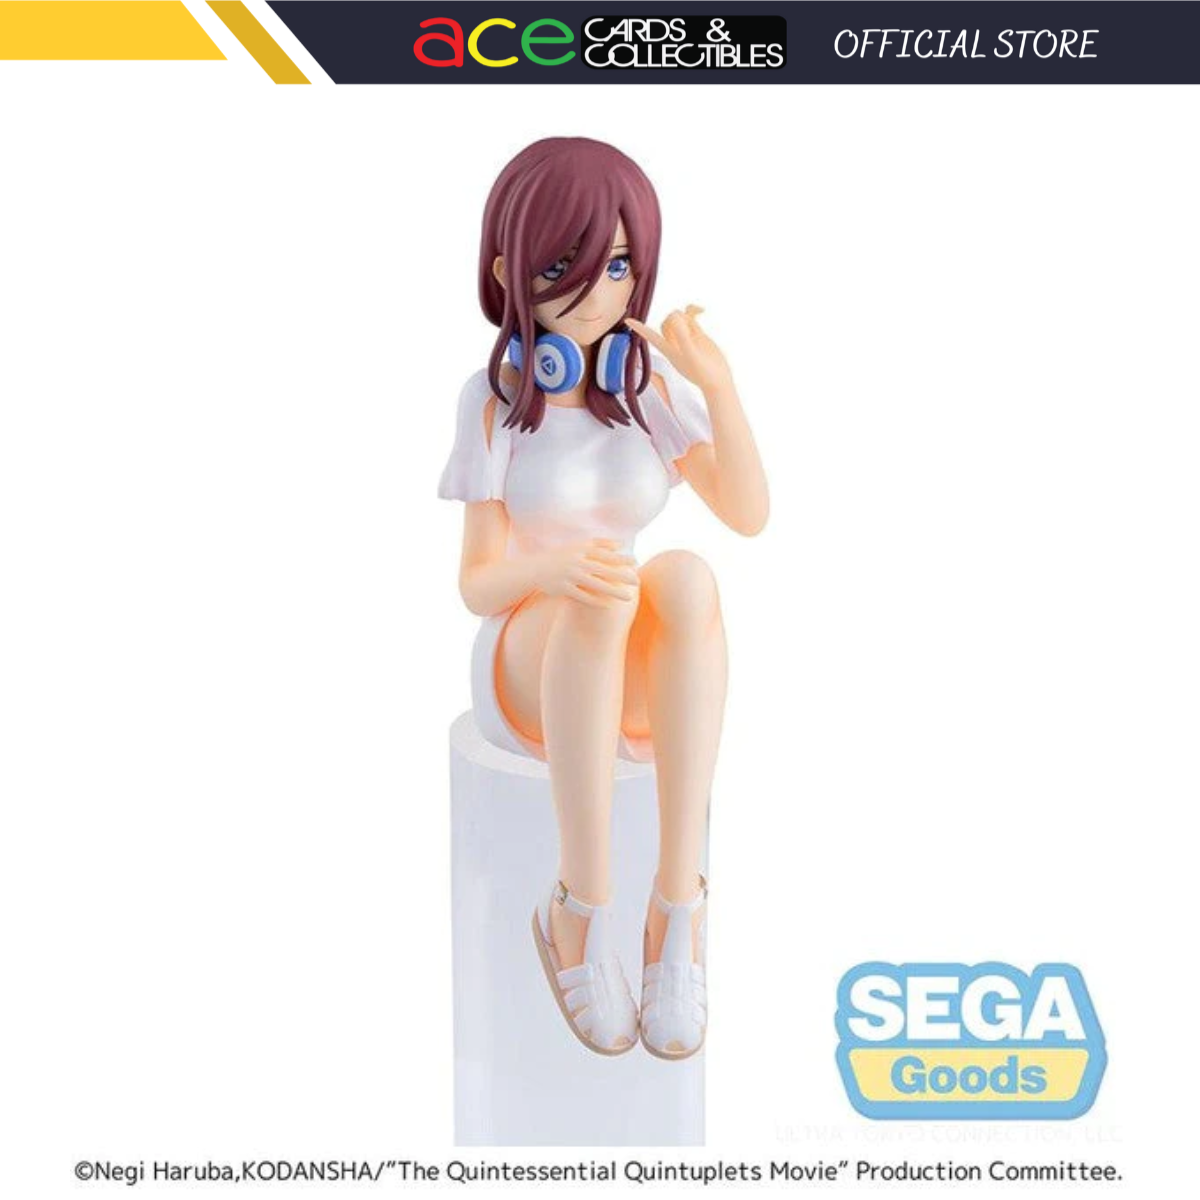 The Quintessential Quintuplets Movie PM Perching Figure &quot;Miku Nakano&quot;-Sega-Ace Cards &amp; Collectibles